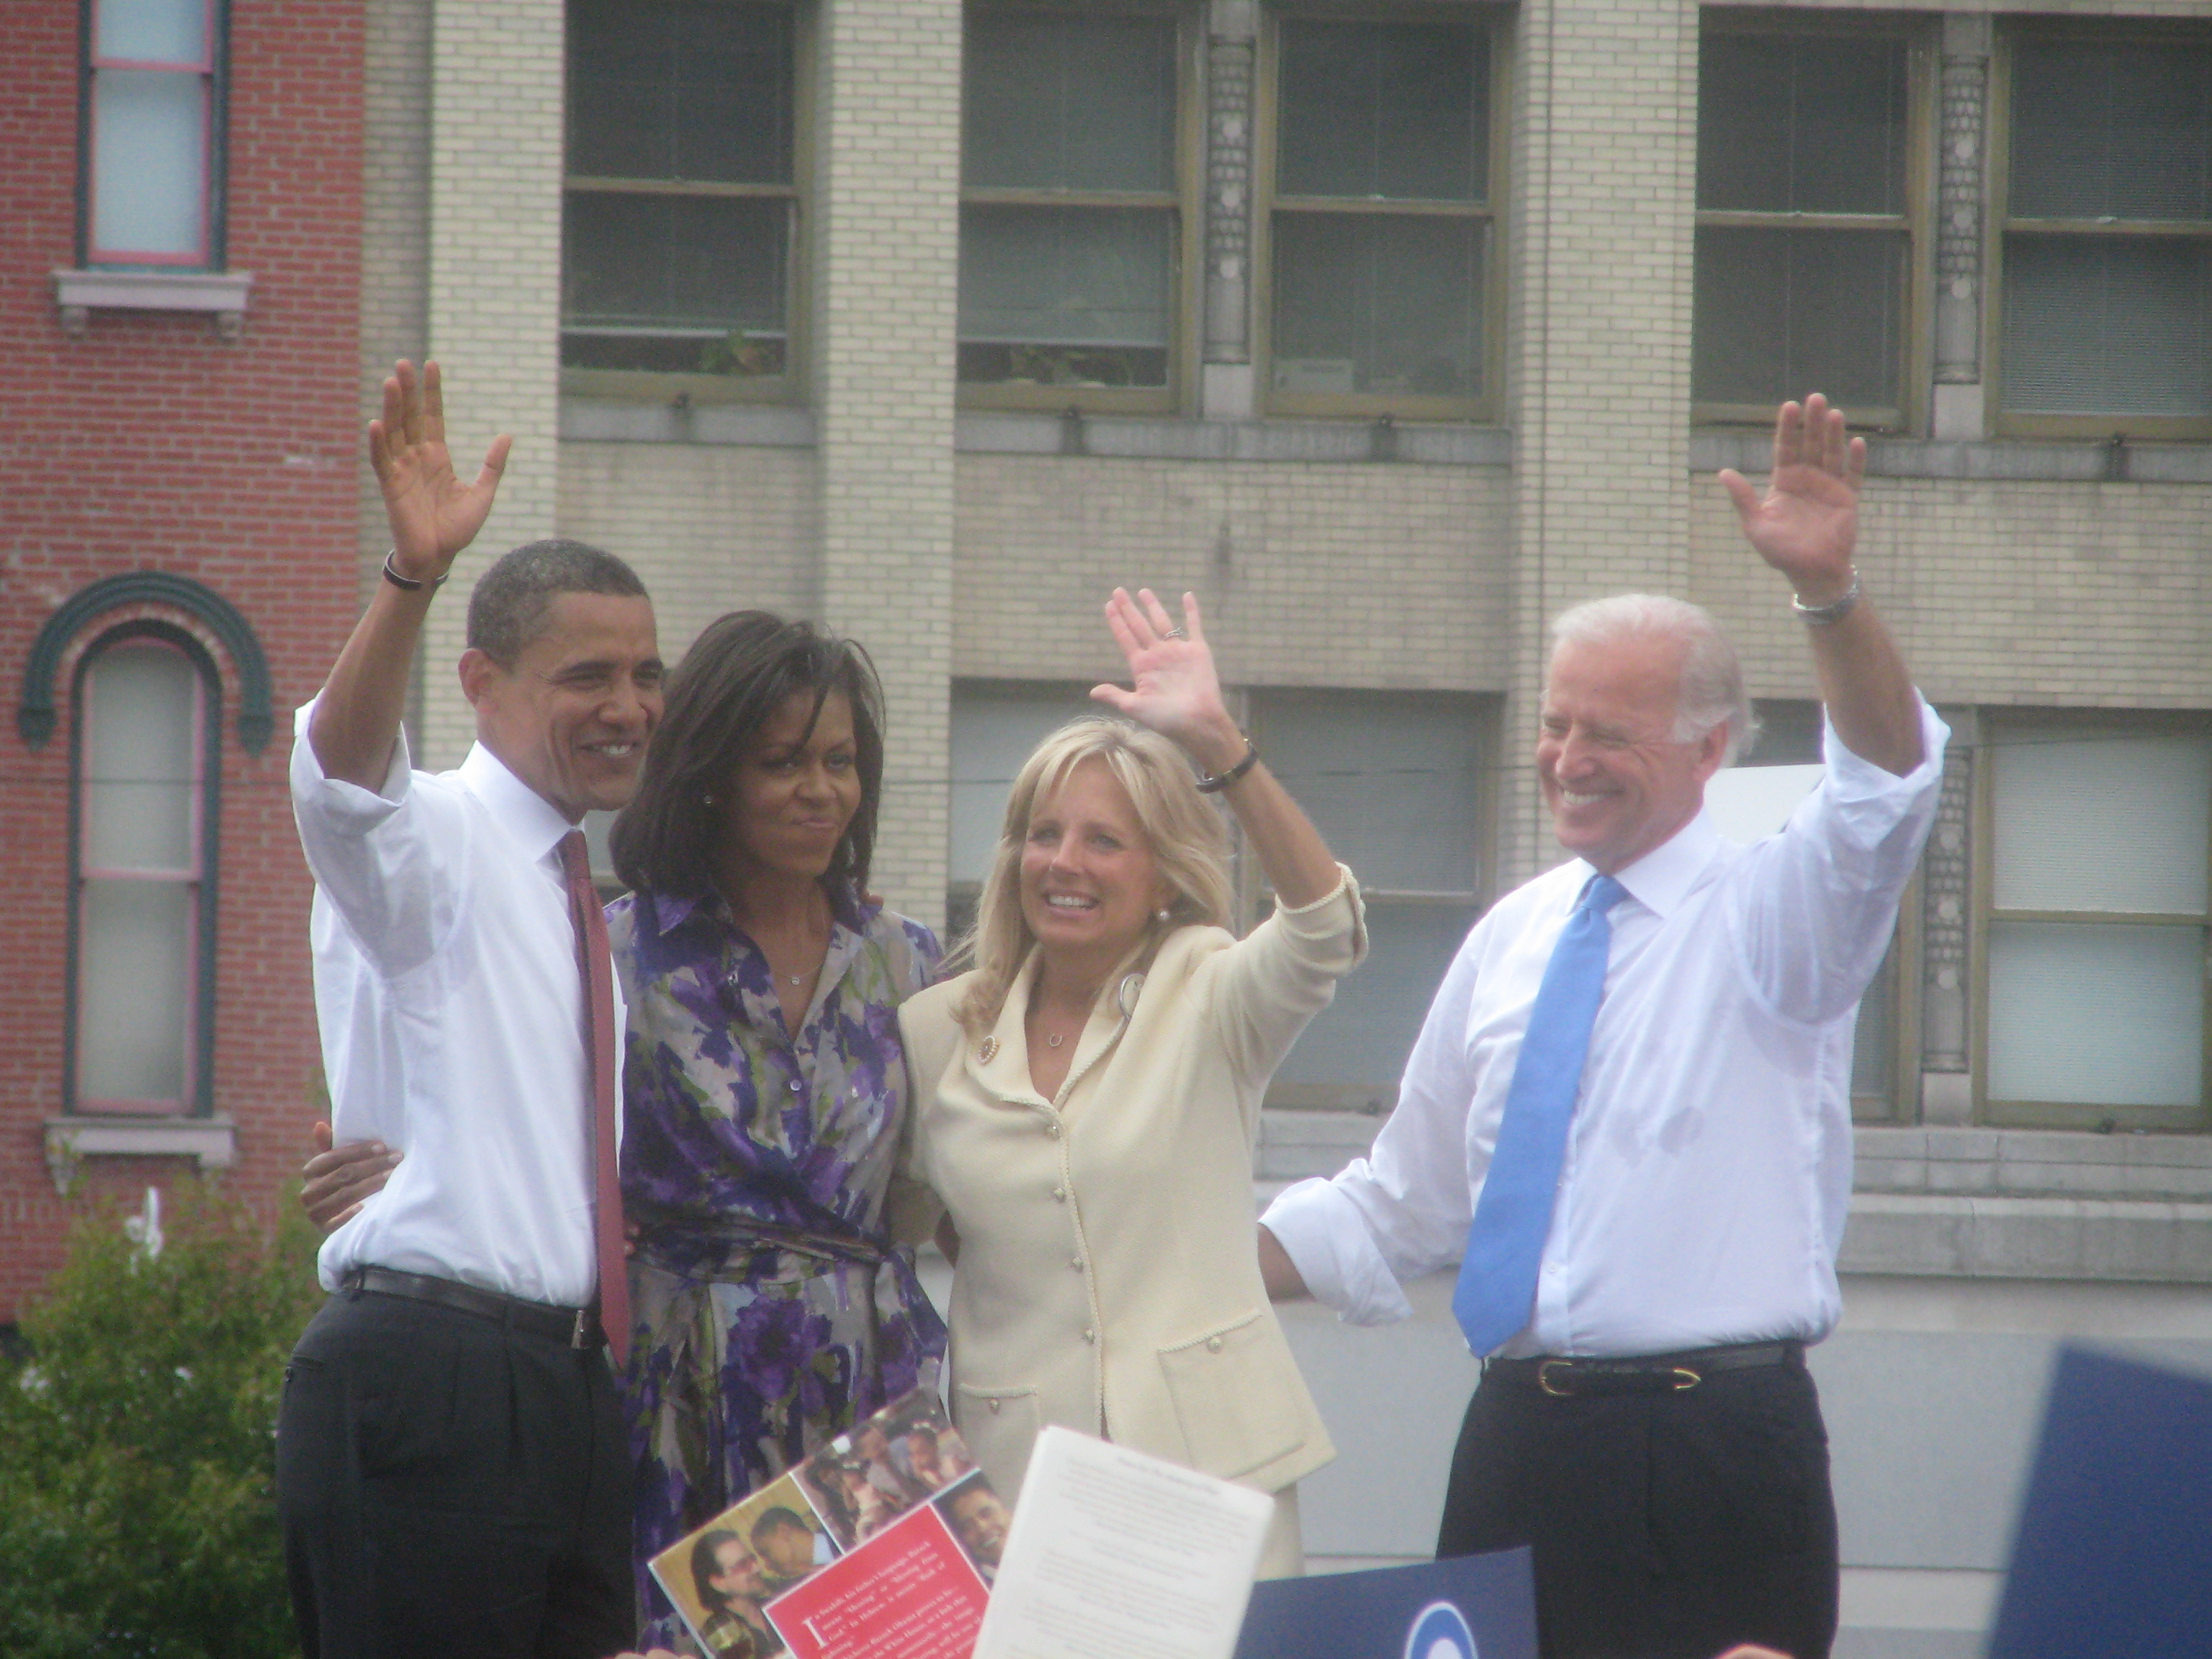 Barack and Michelle Obama, Jill and Joe Biden at the Barack Obama-Joe Biden United States Vice Presidential announcement in Springfield, Illinois Photo by TonyTheTiger Creative Commons